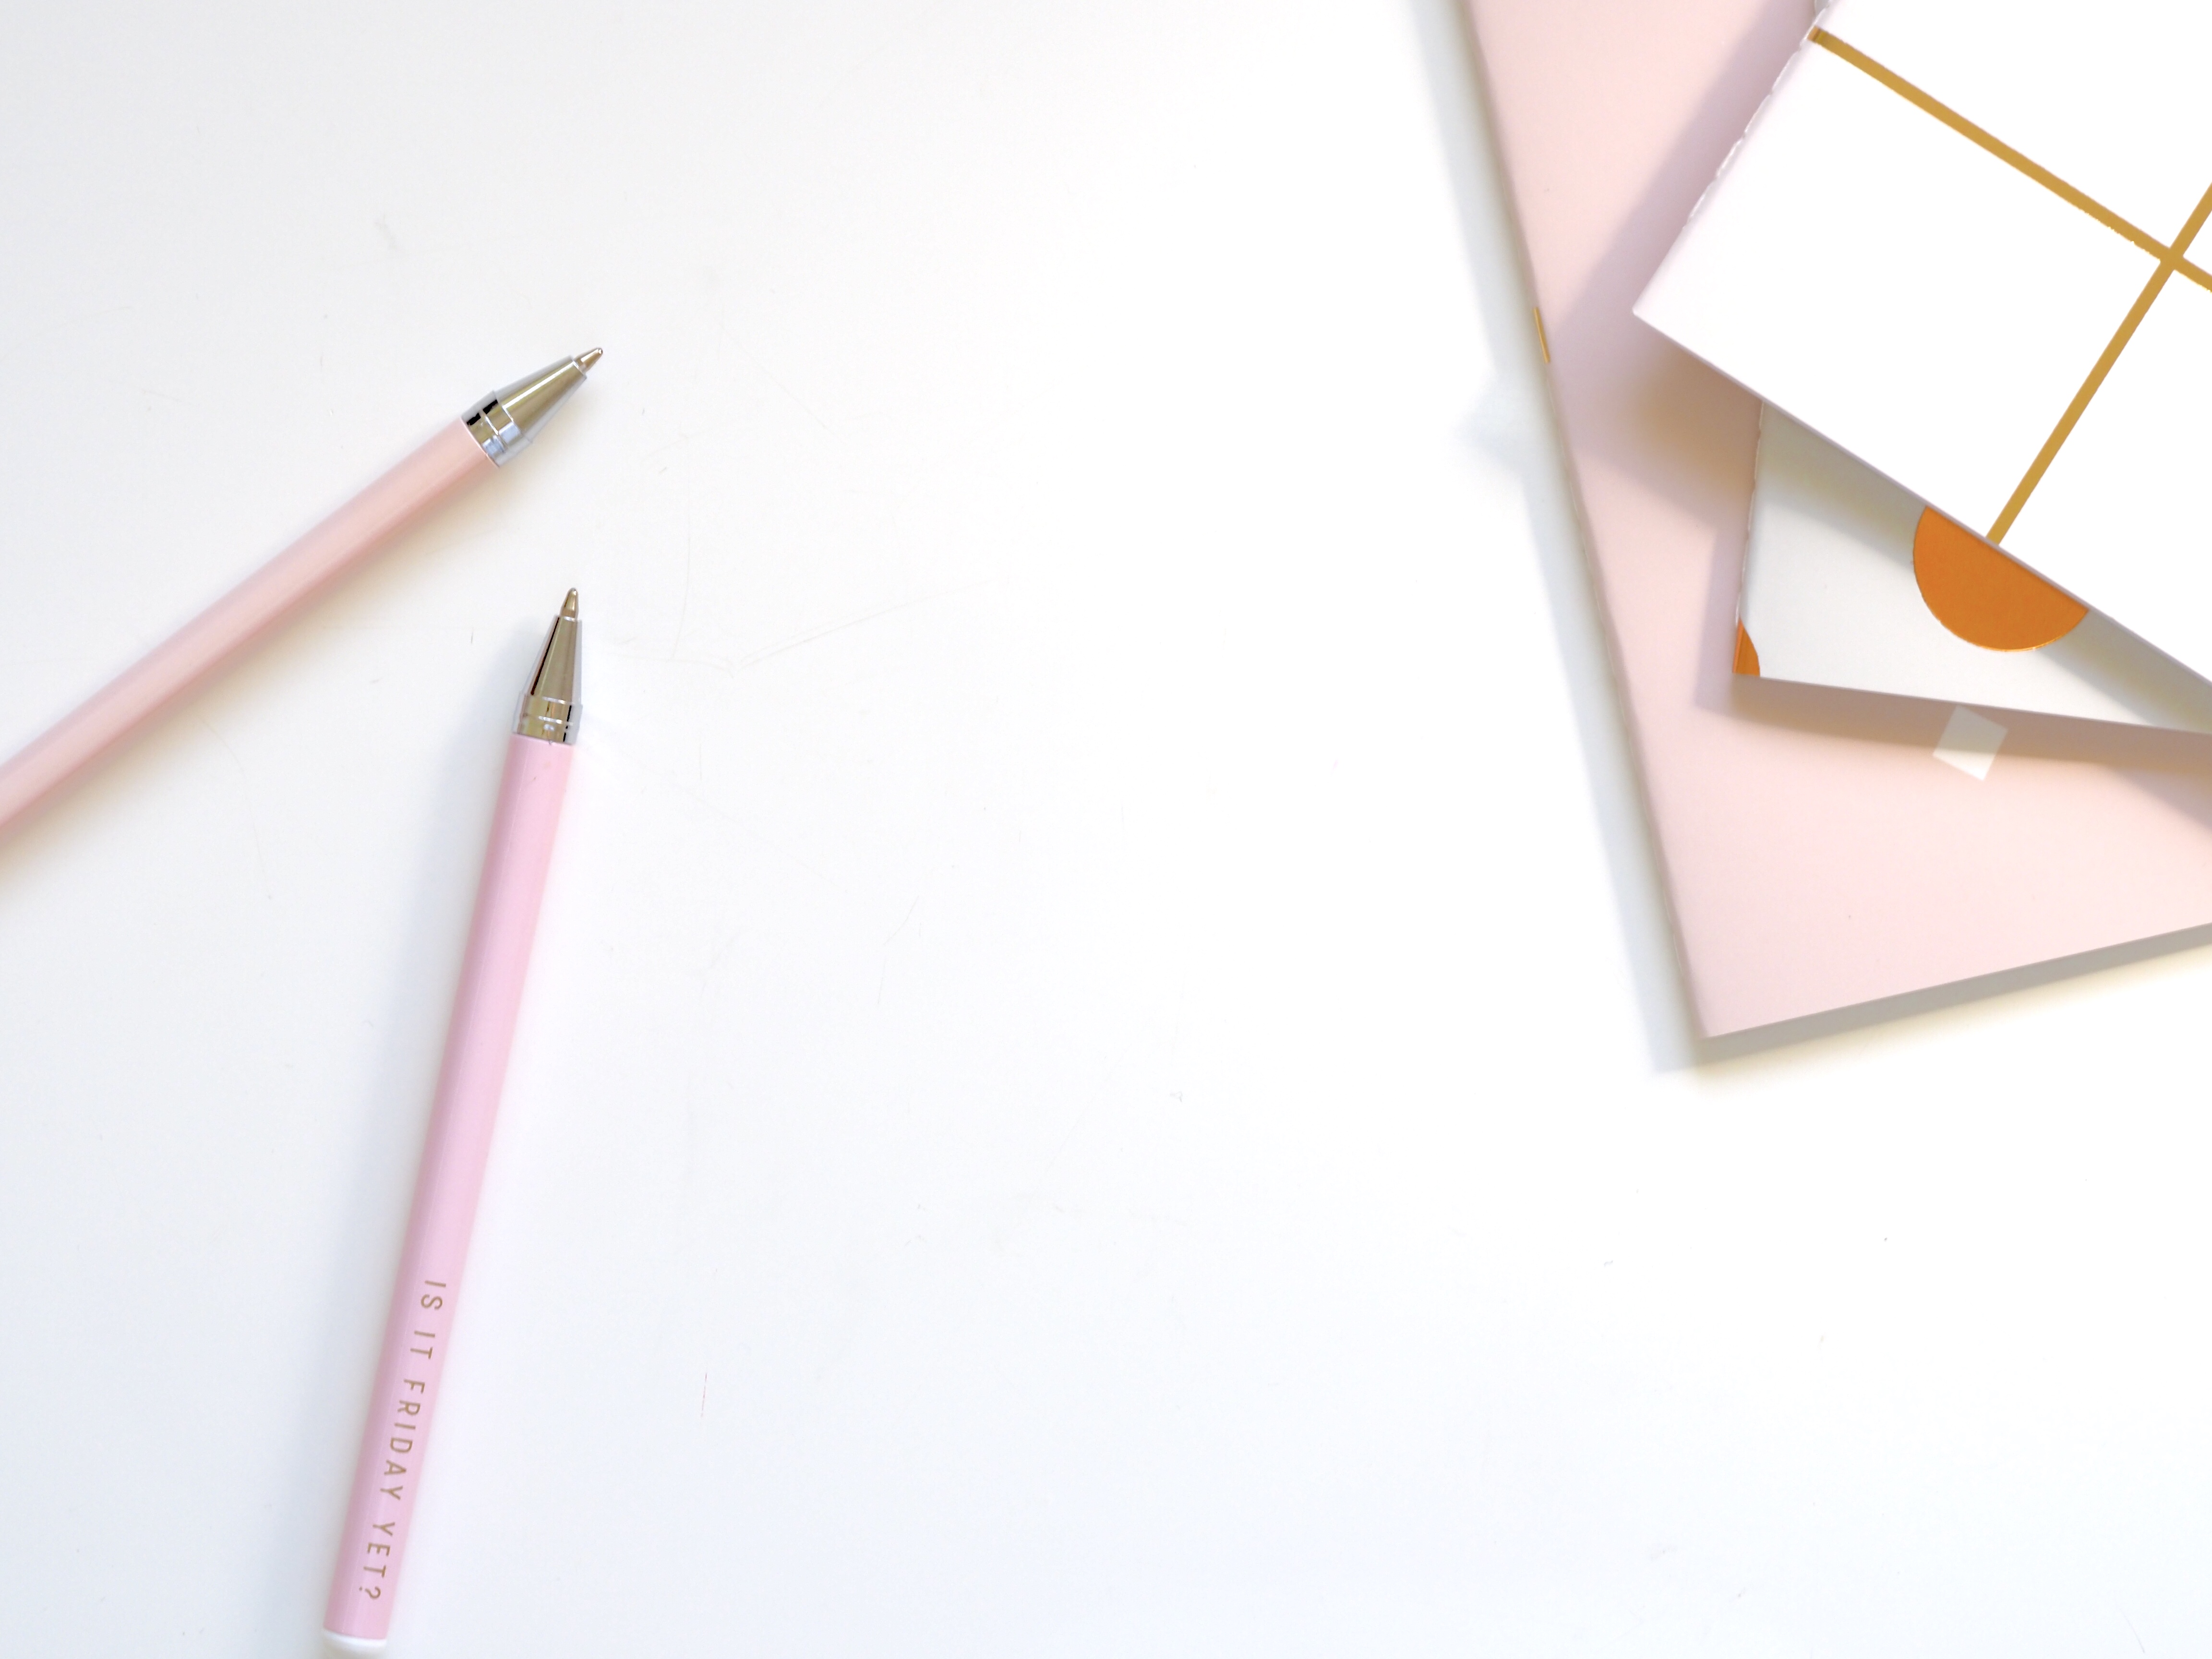 r288-two-pink-ballpoint-pens-on-table-1007025.jpg